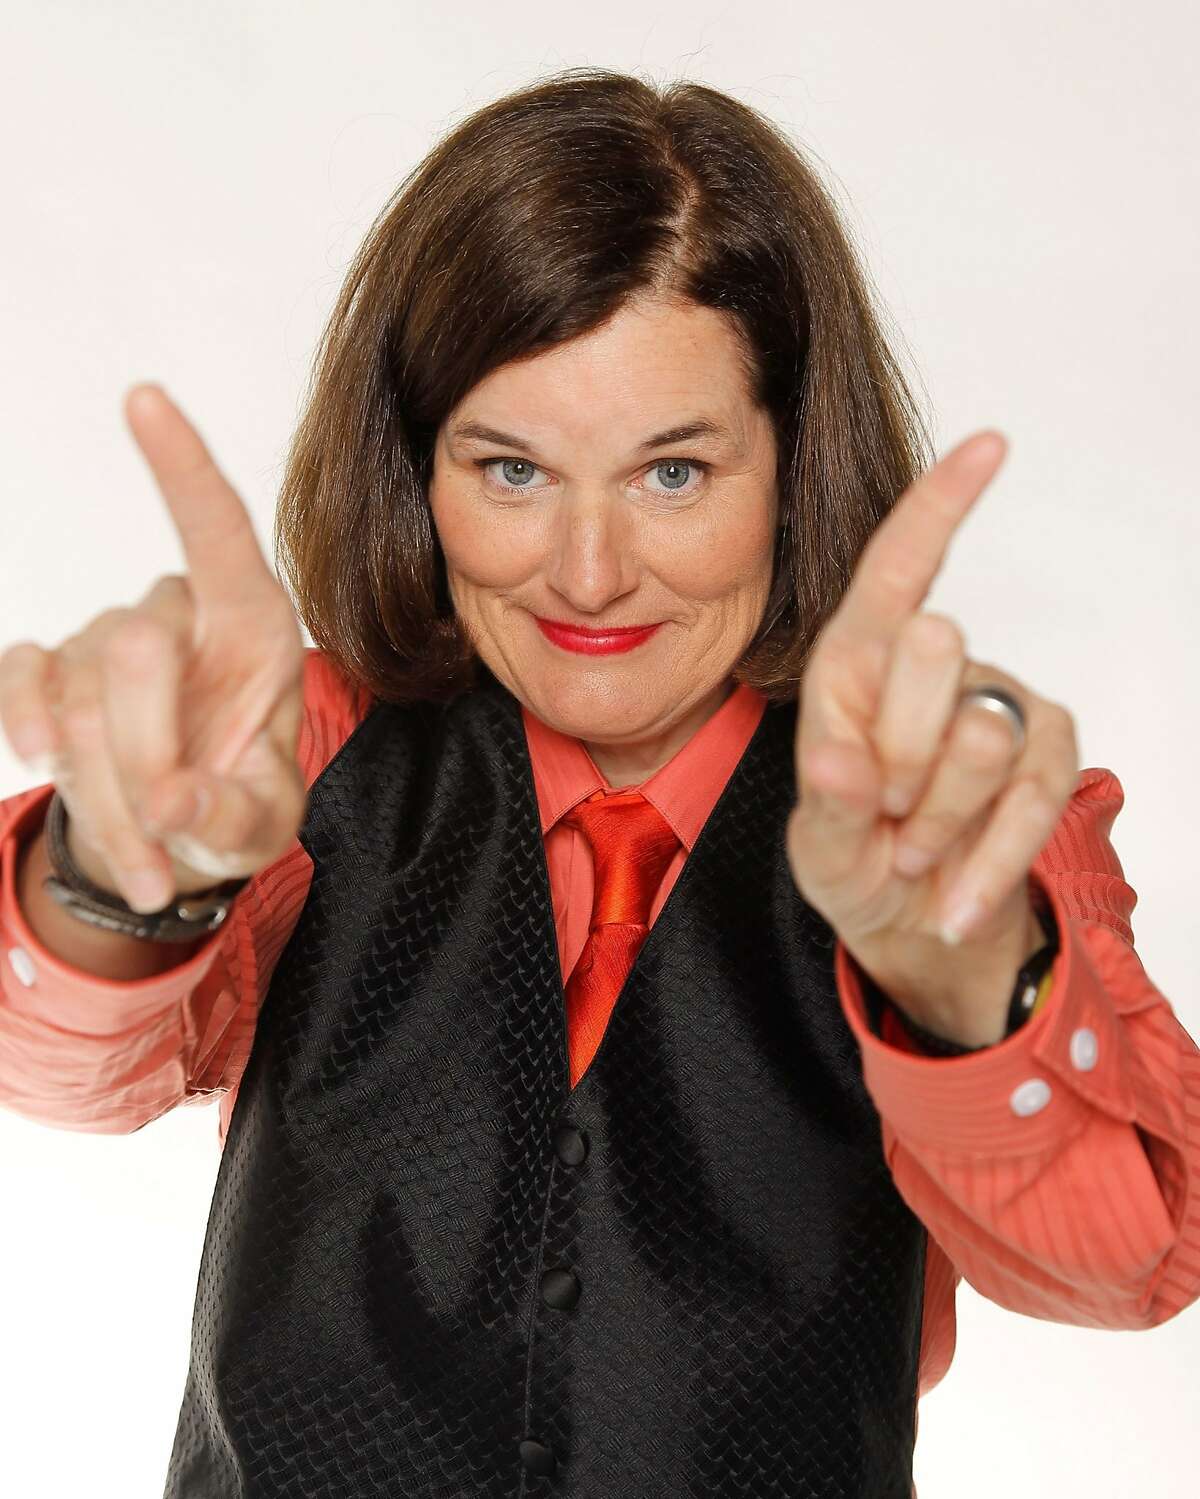 Comedian Paula Poundstone will take the stage at Foxwoods on Friday. Find out more.